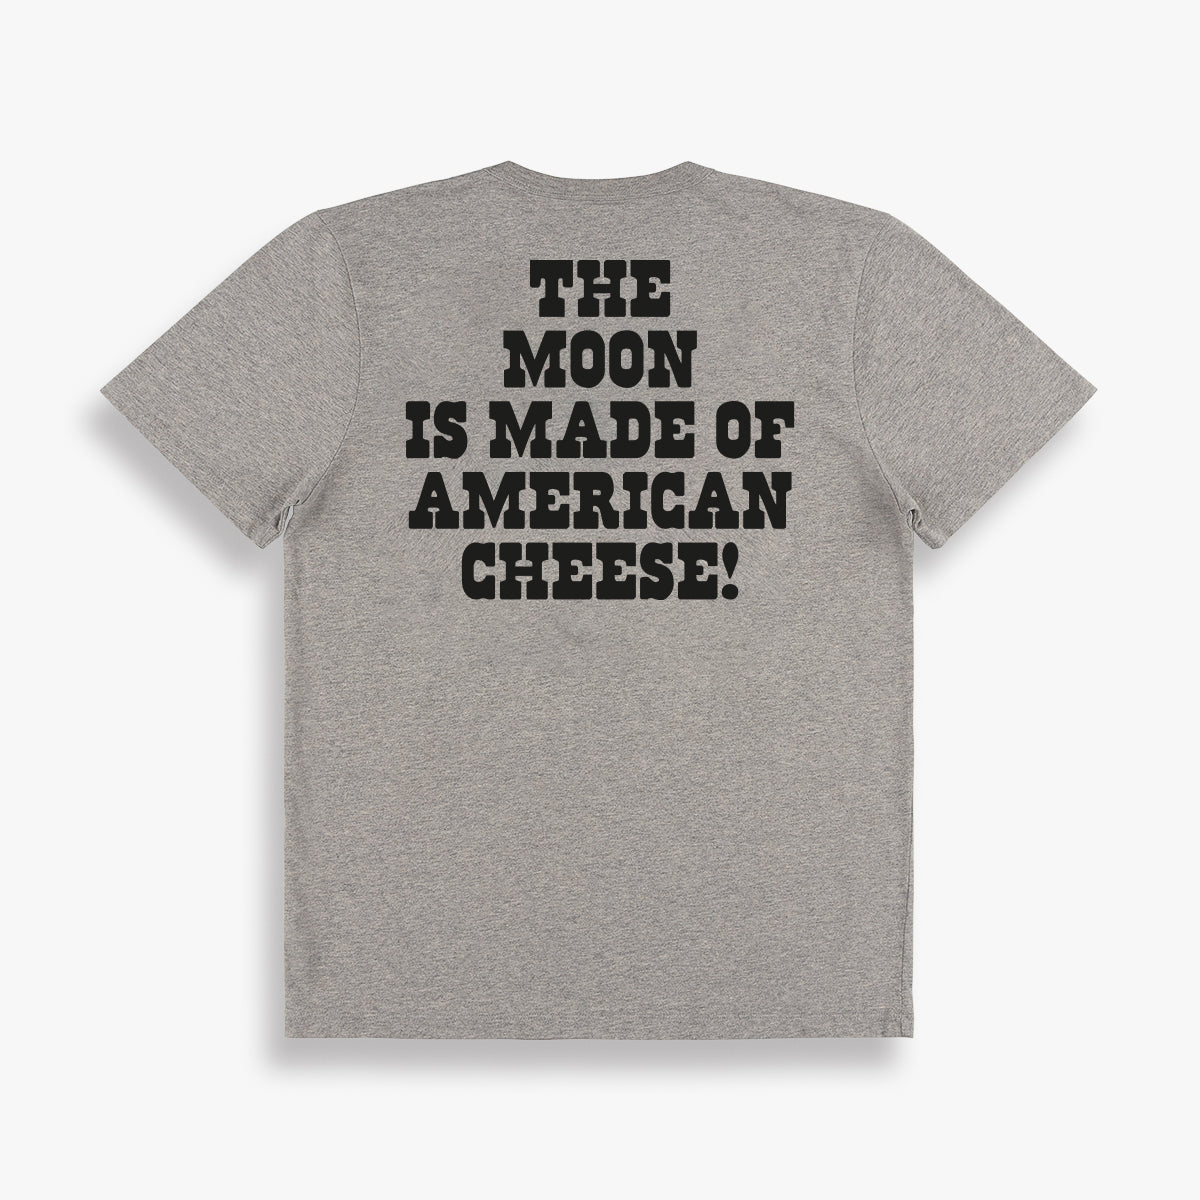 The Moon Is Made of American Cheese Tee